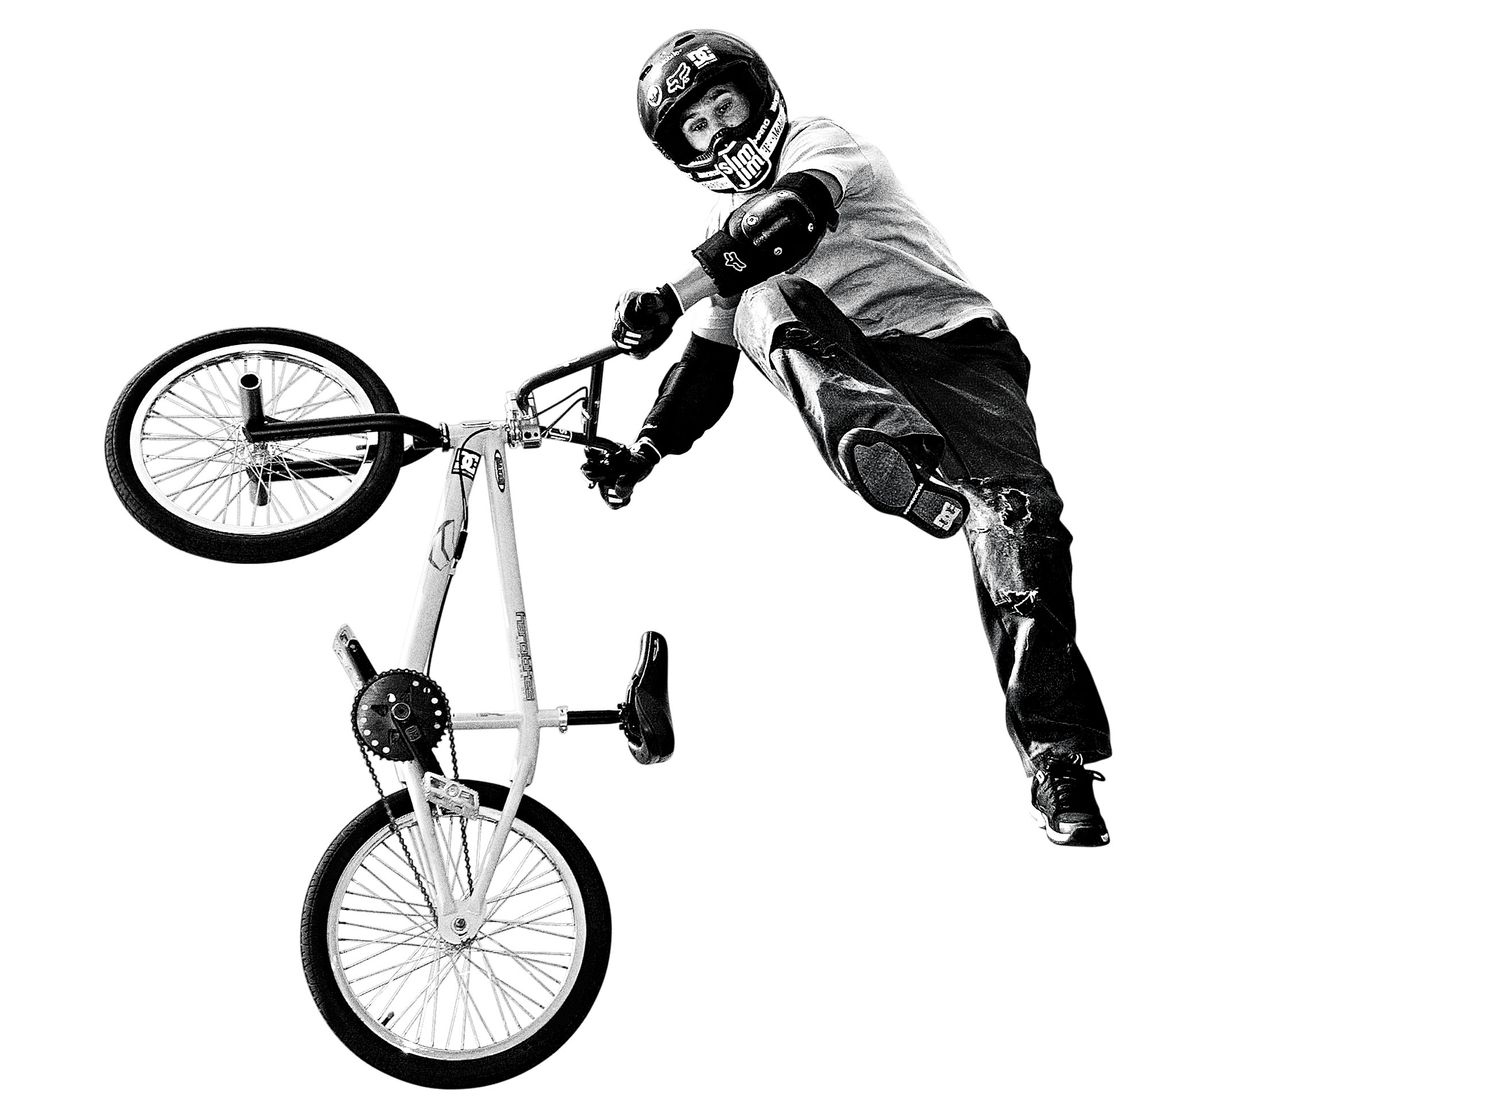 Outward Grand Tentacle The Last Days of BMX Superstar Dave Mirra -- NYMag